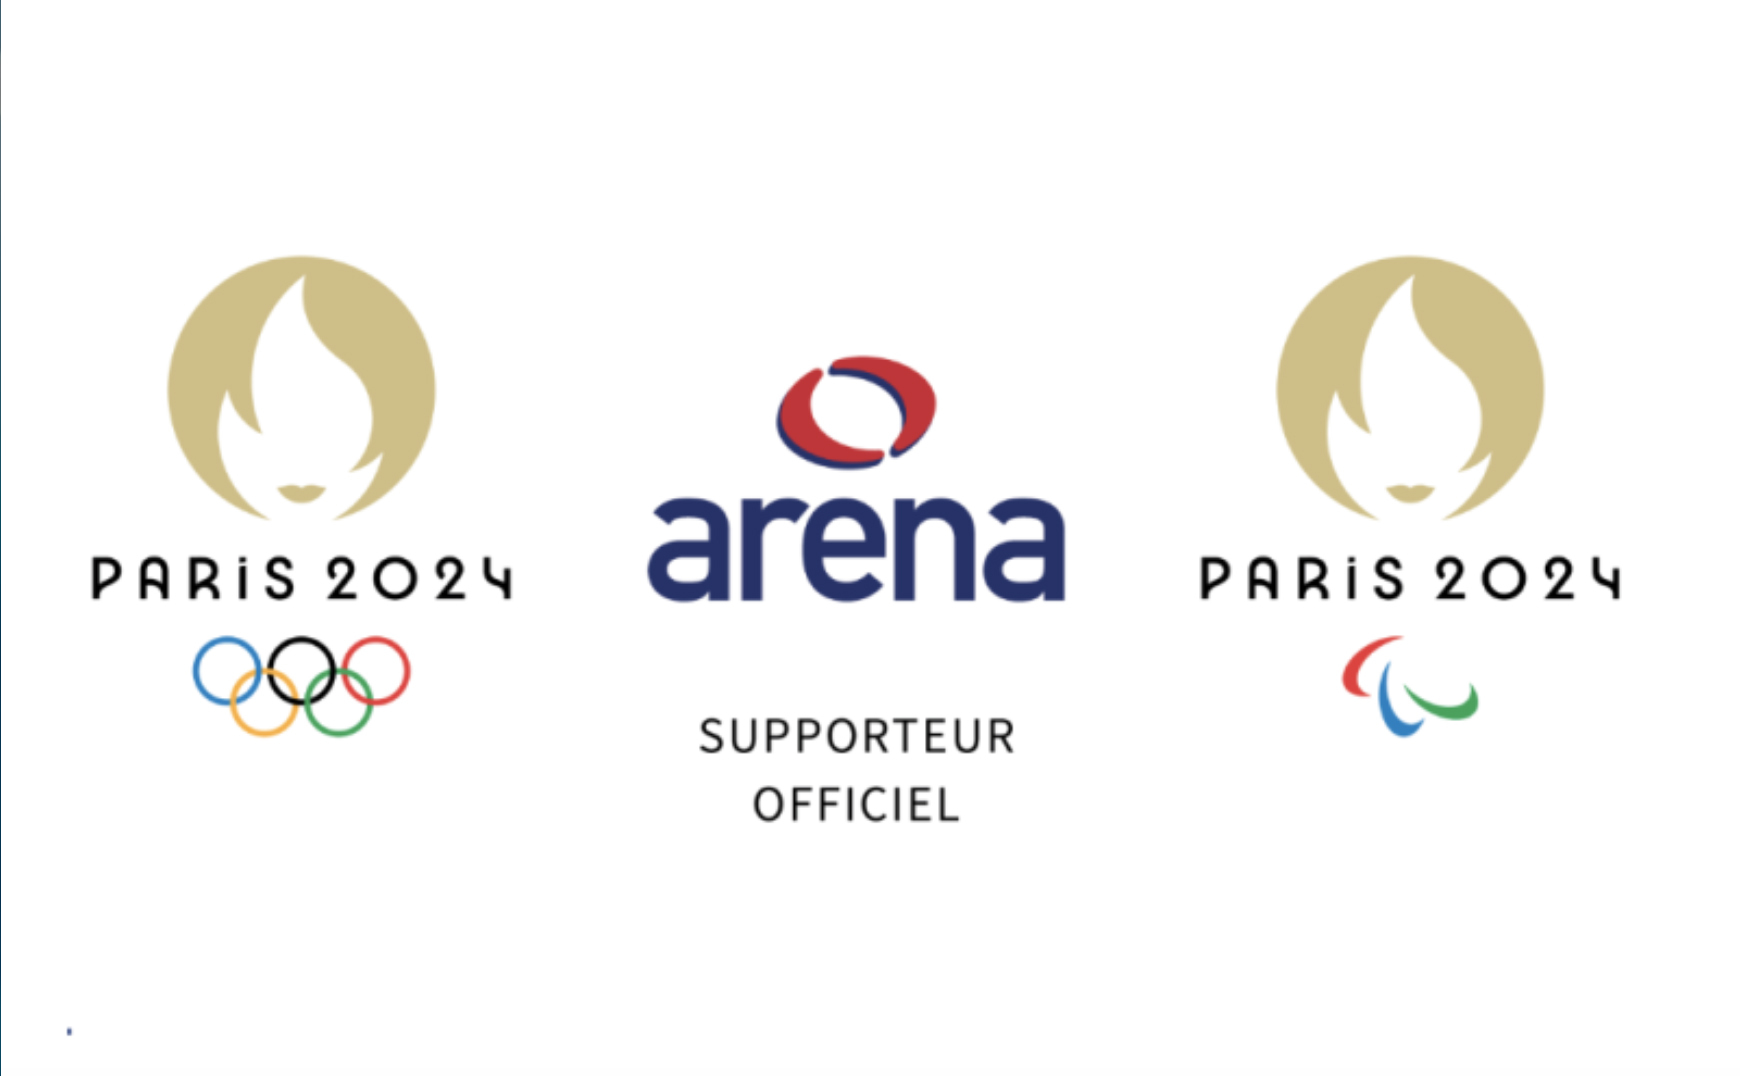 What travelers should know about the Paris 2024 Olympics and Paralympics